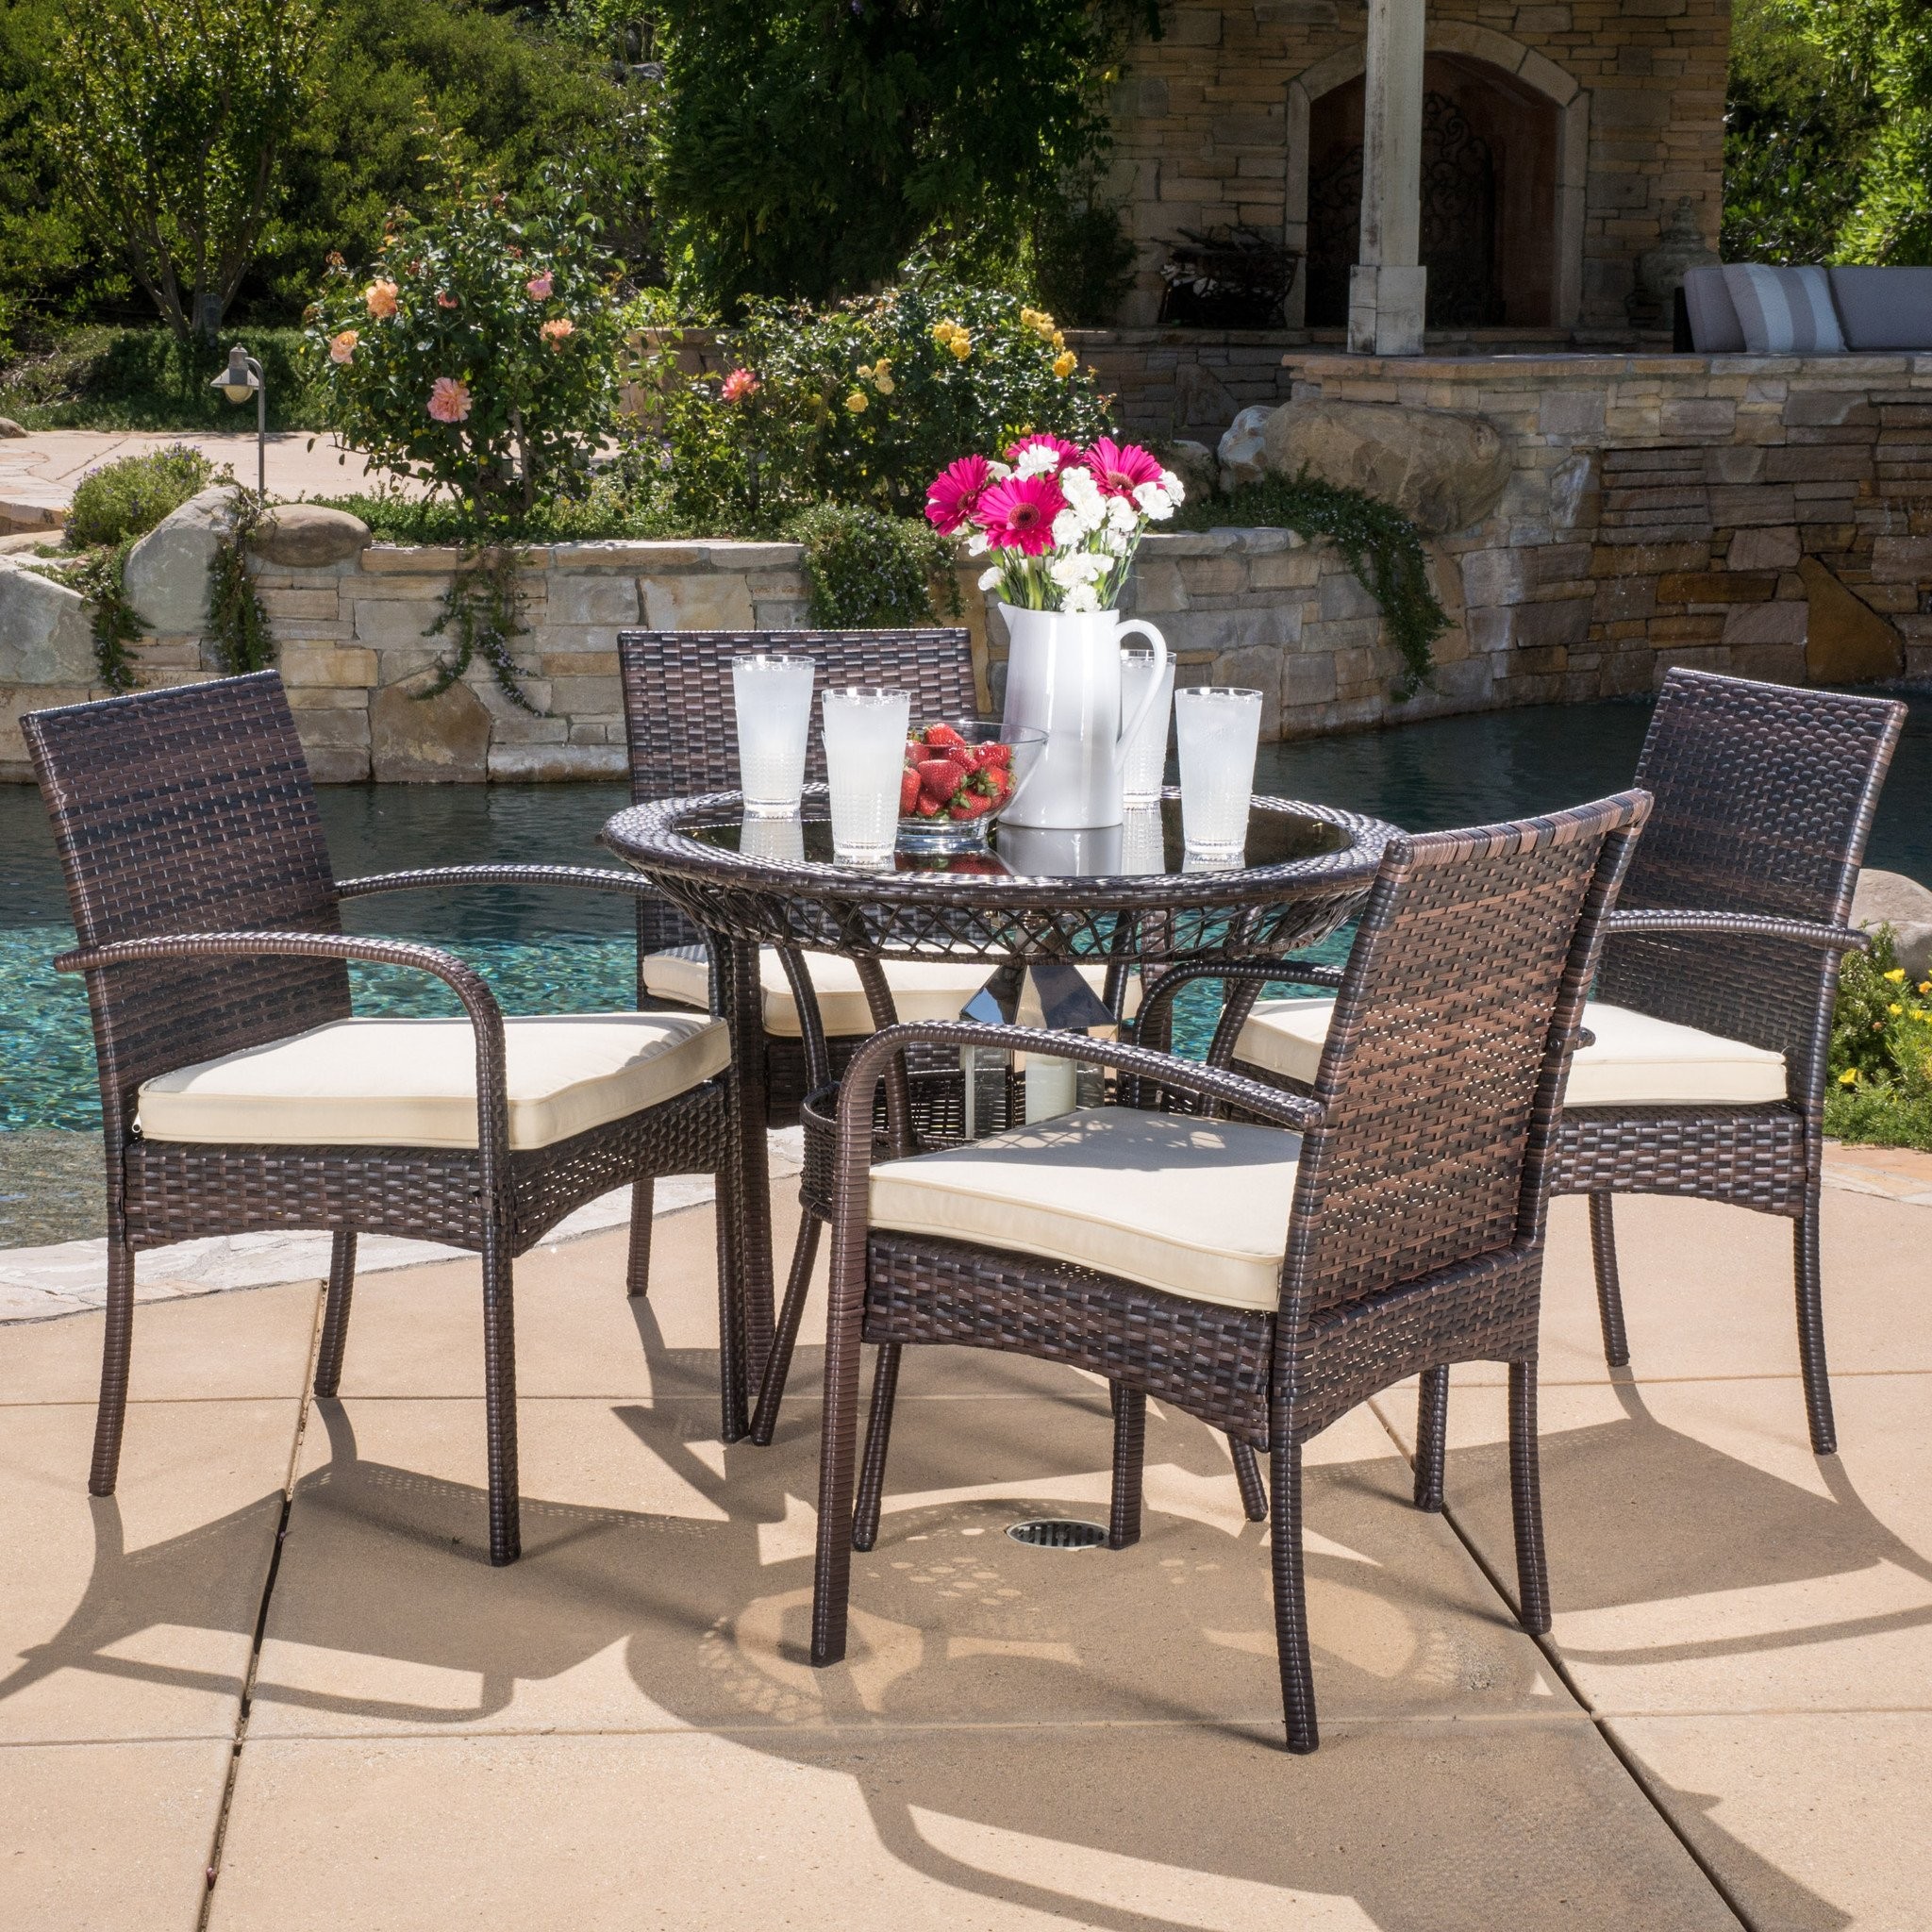 Blake Outdoor 5-piece Wicker Dining Set with Cushi...